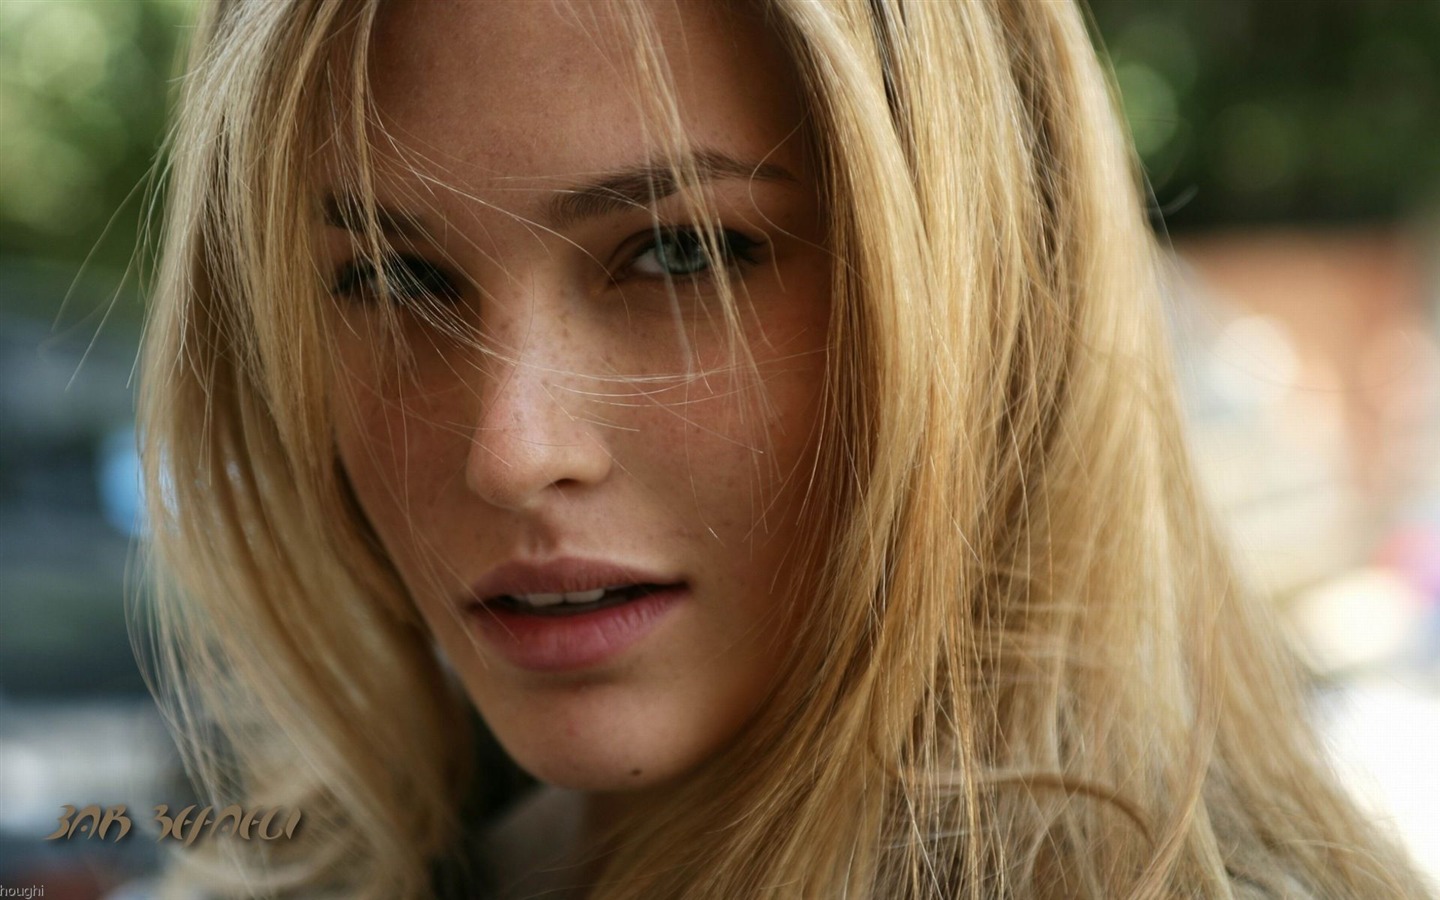 Bar Refaeli #003 - 1440x900 Wallpapers Pictures Photos Images